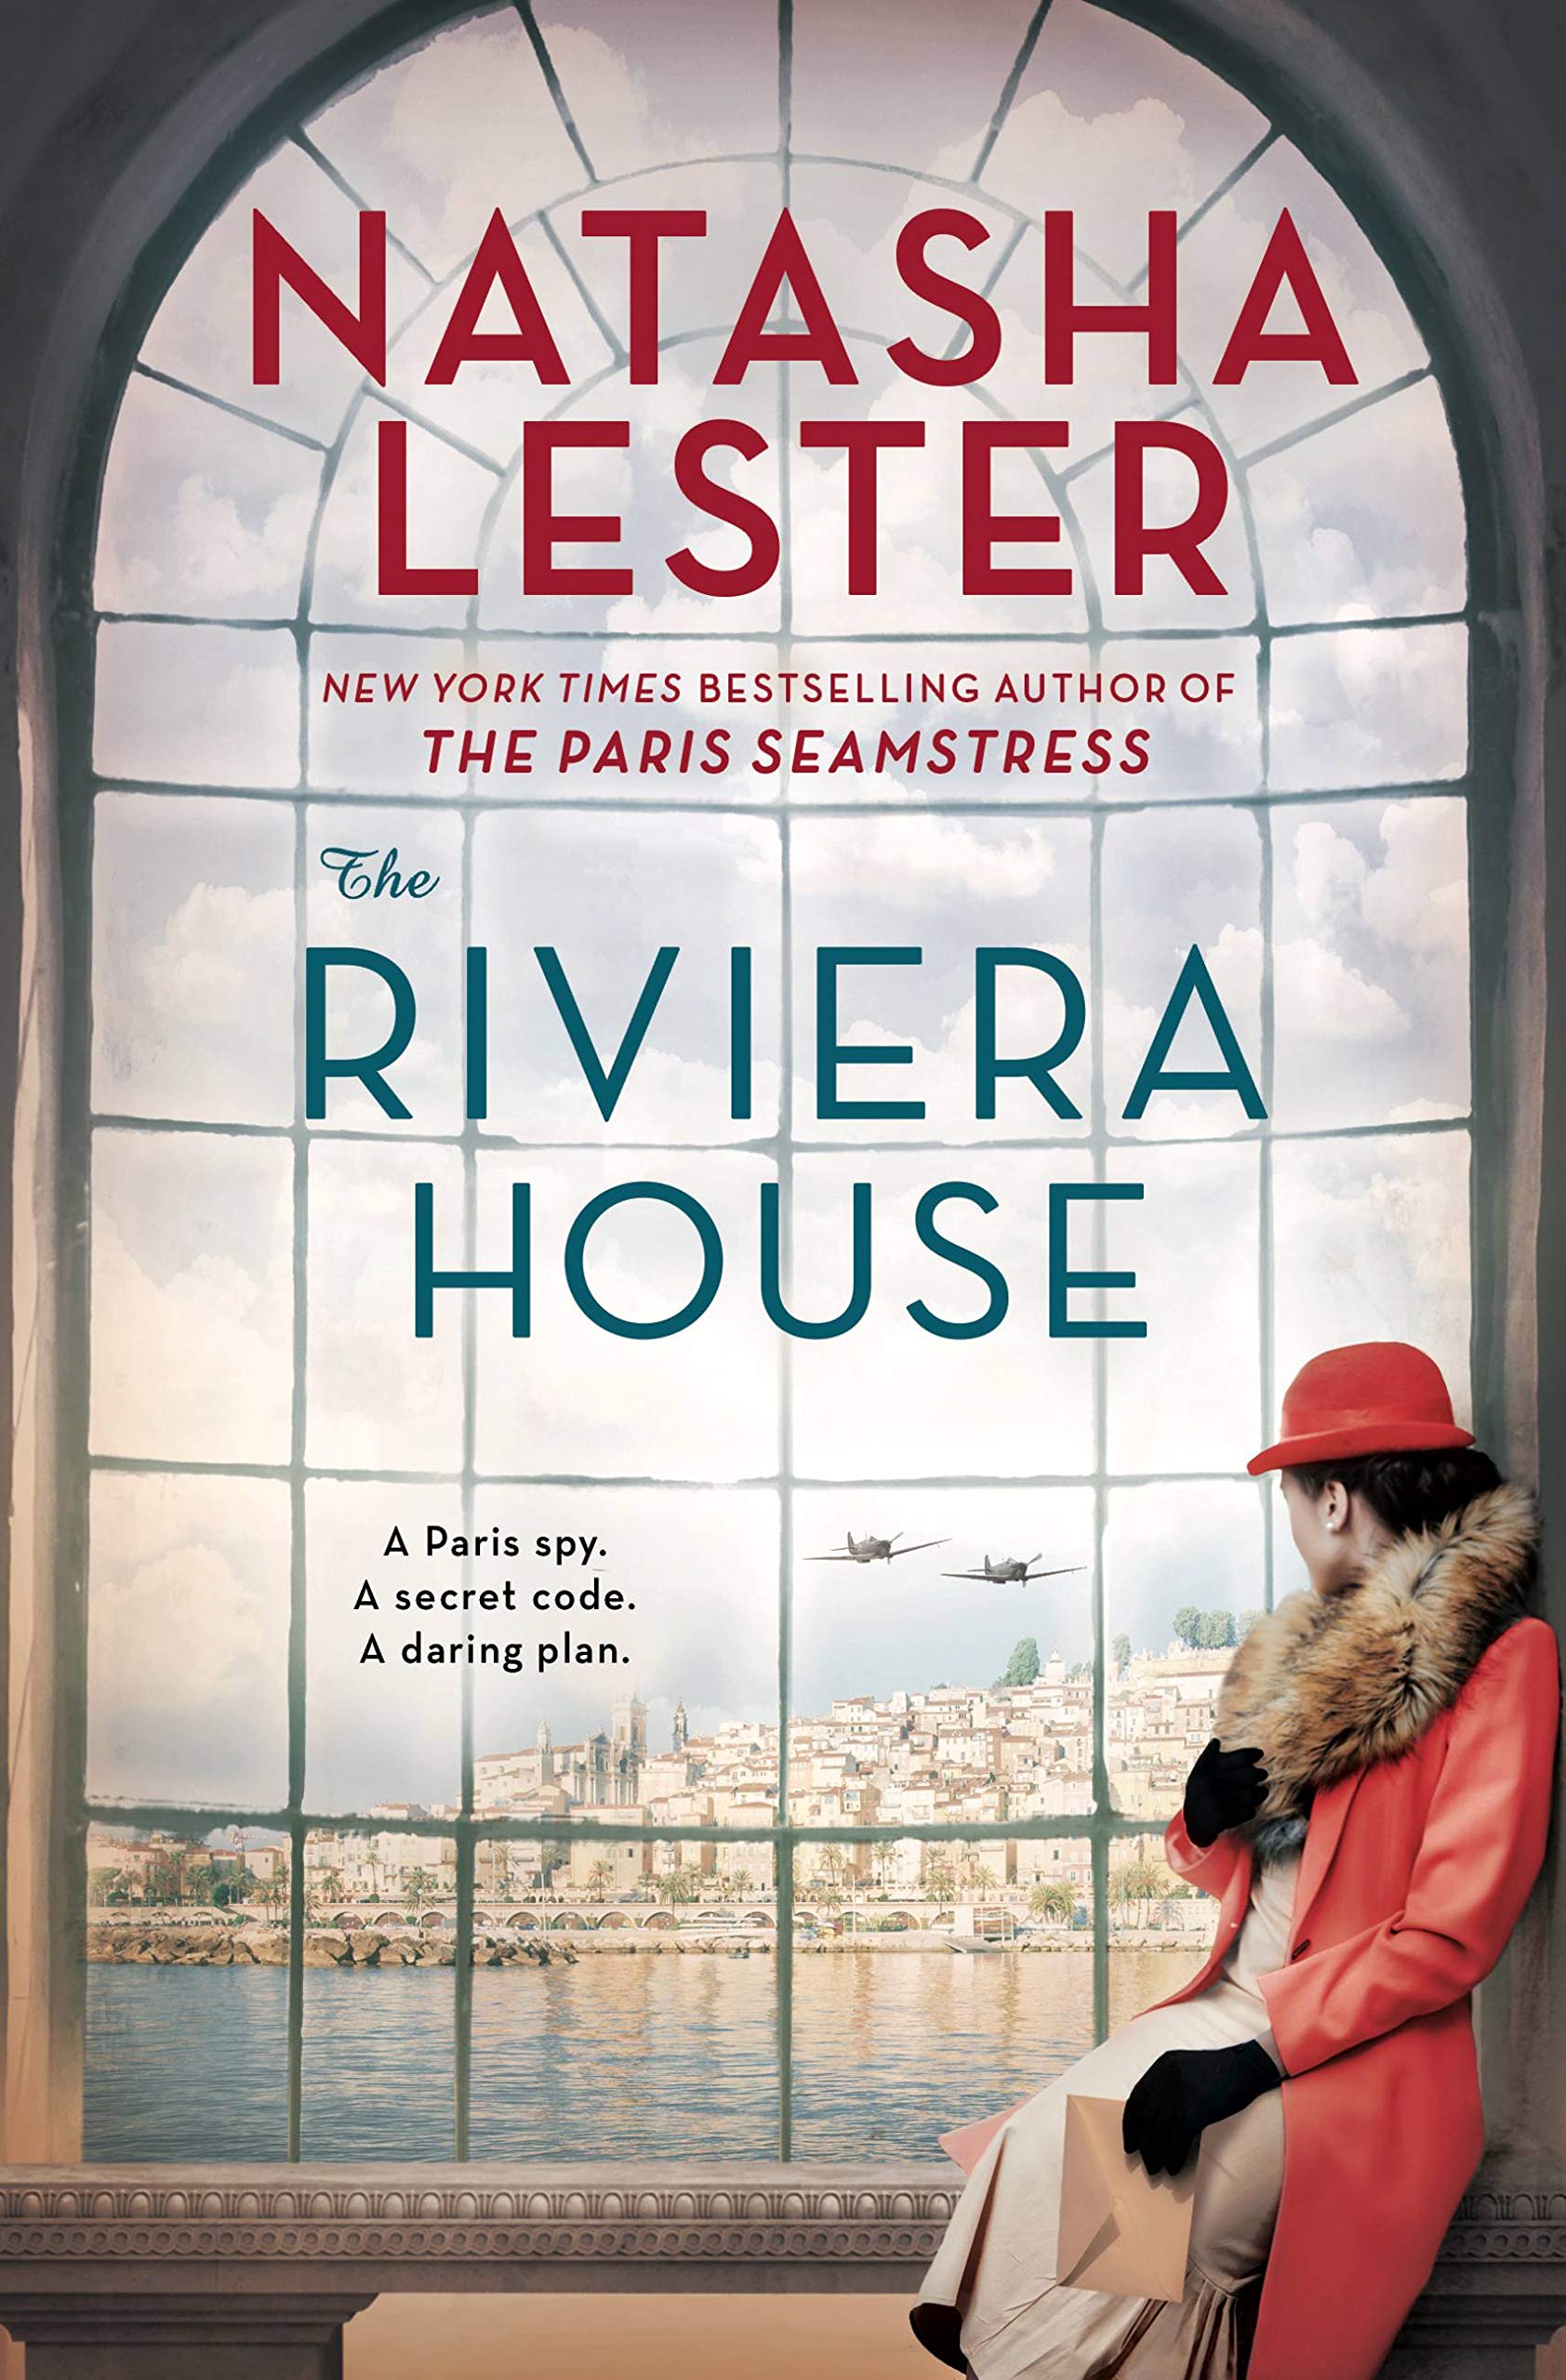 Image for "The Riviera House"